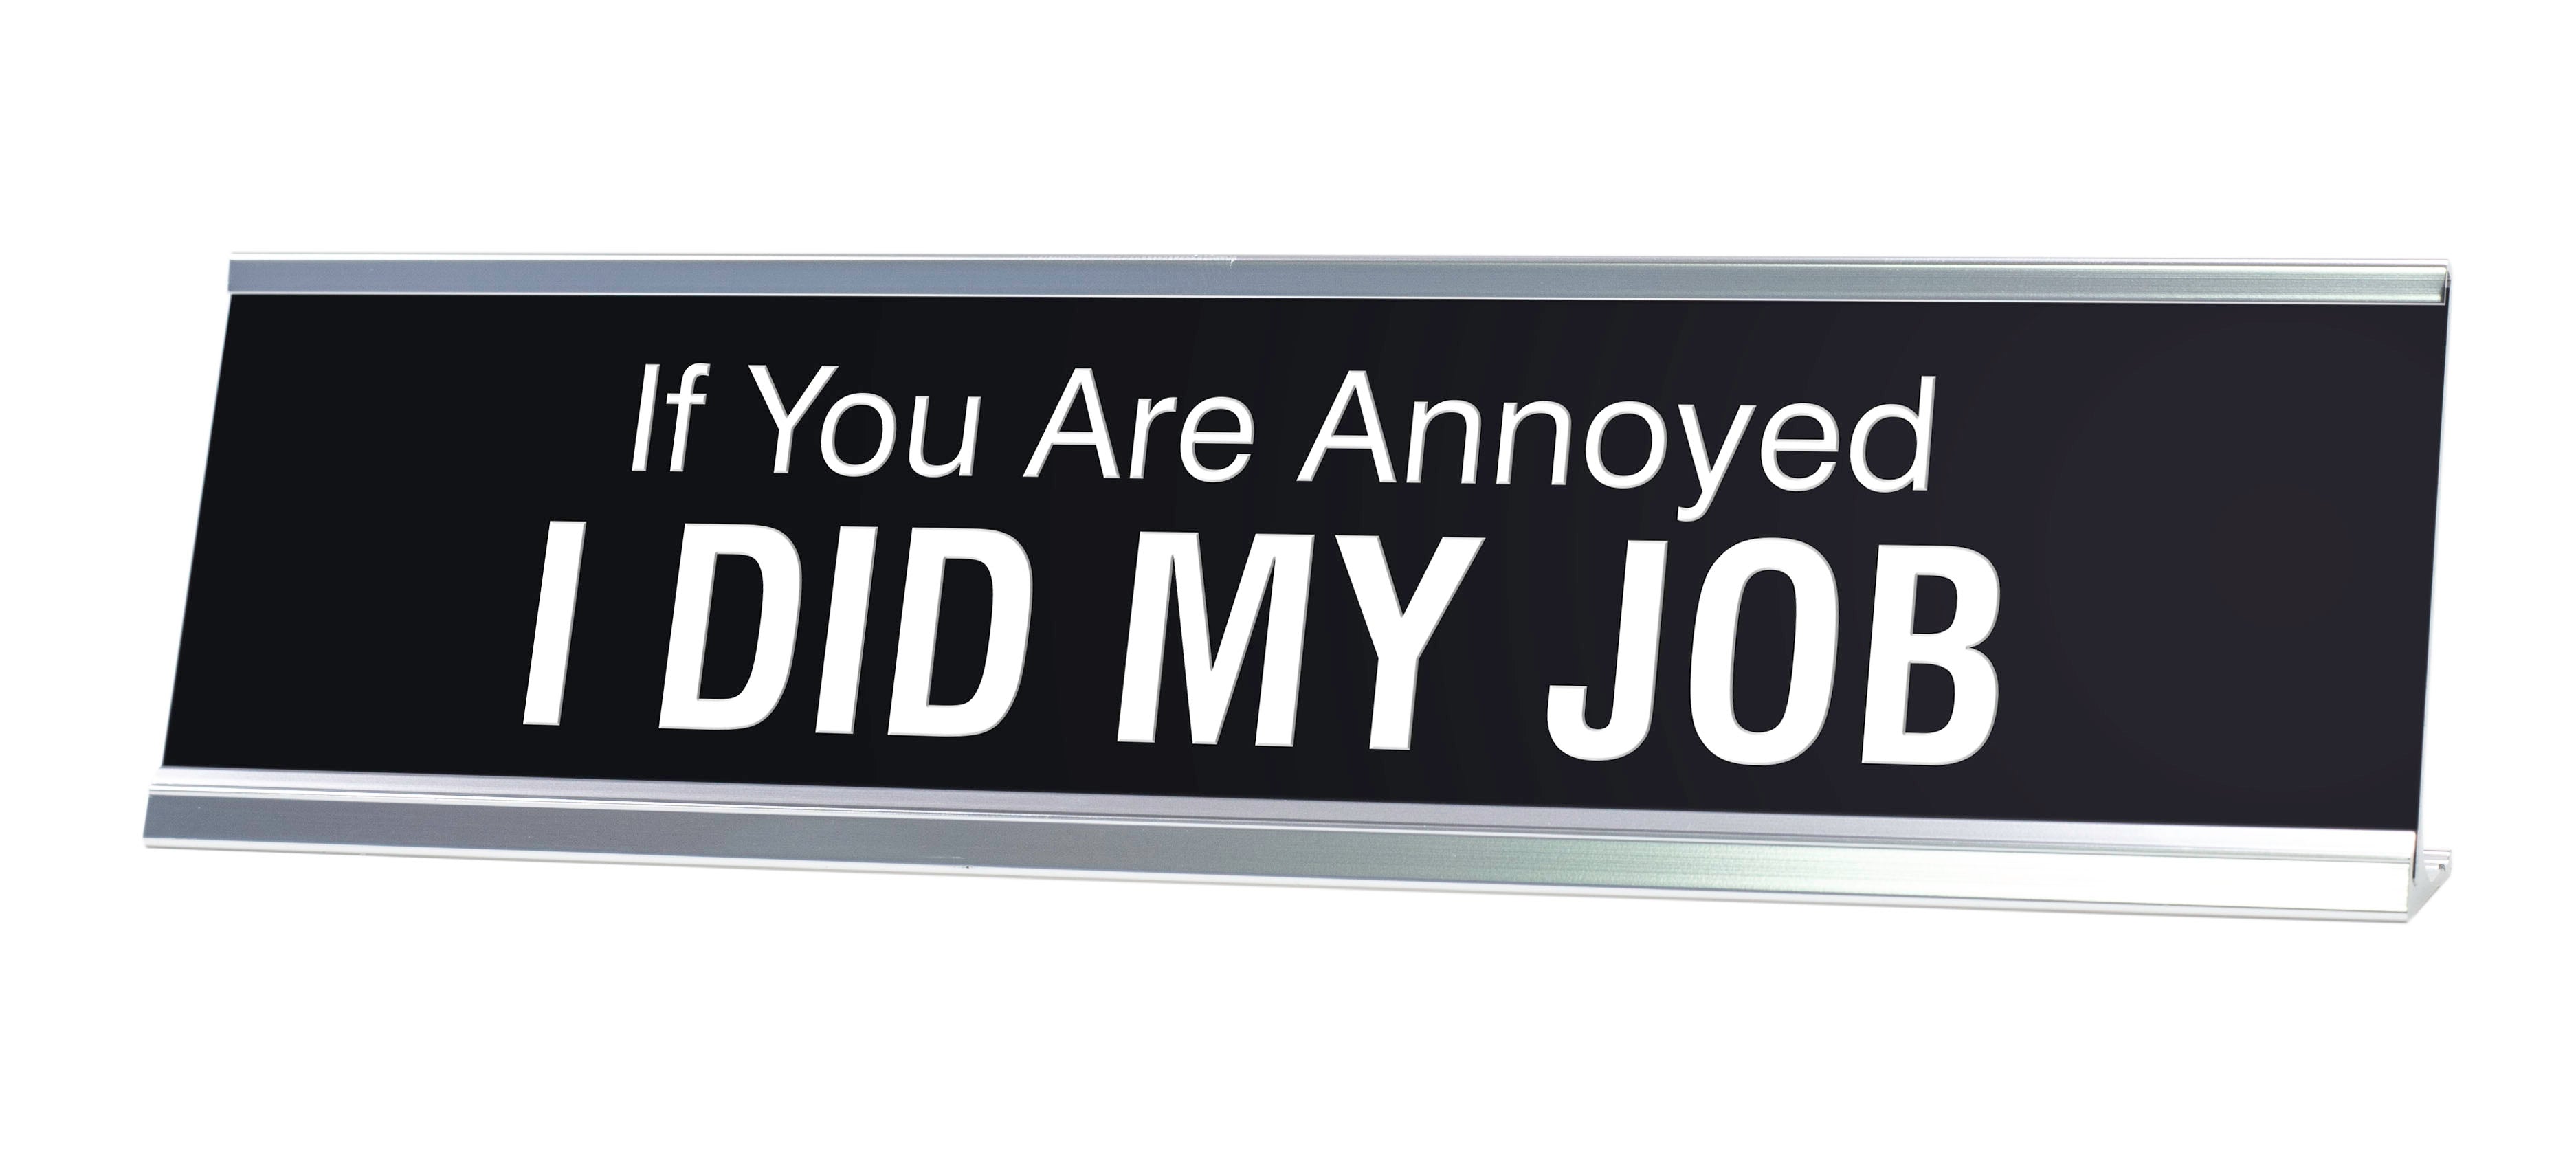 If You Are Annoyed I DID MY JOB Novelty Desk Sign